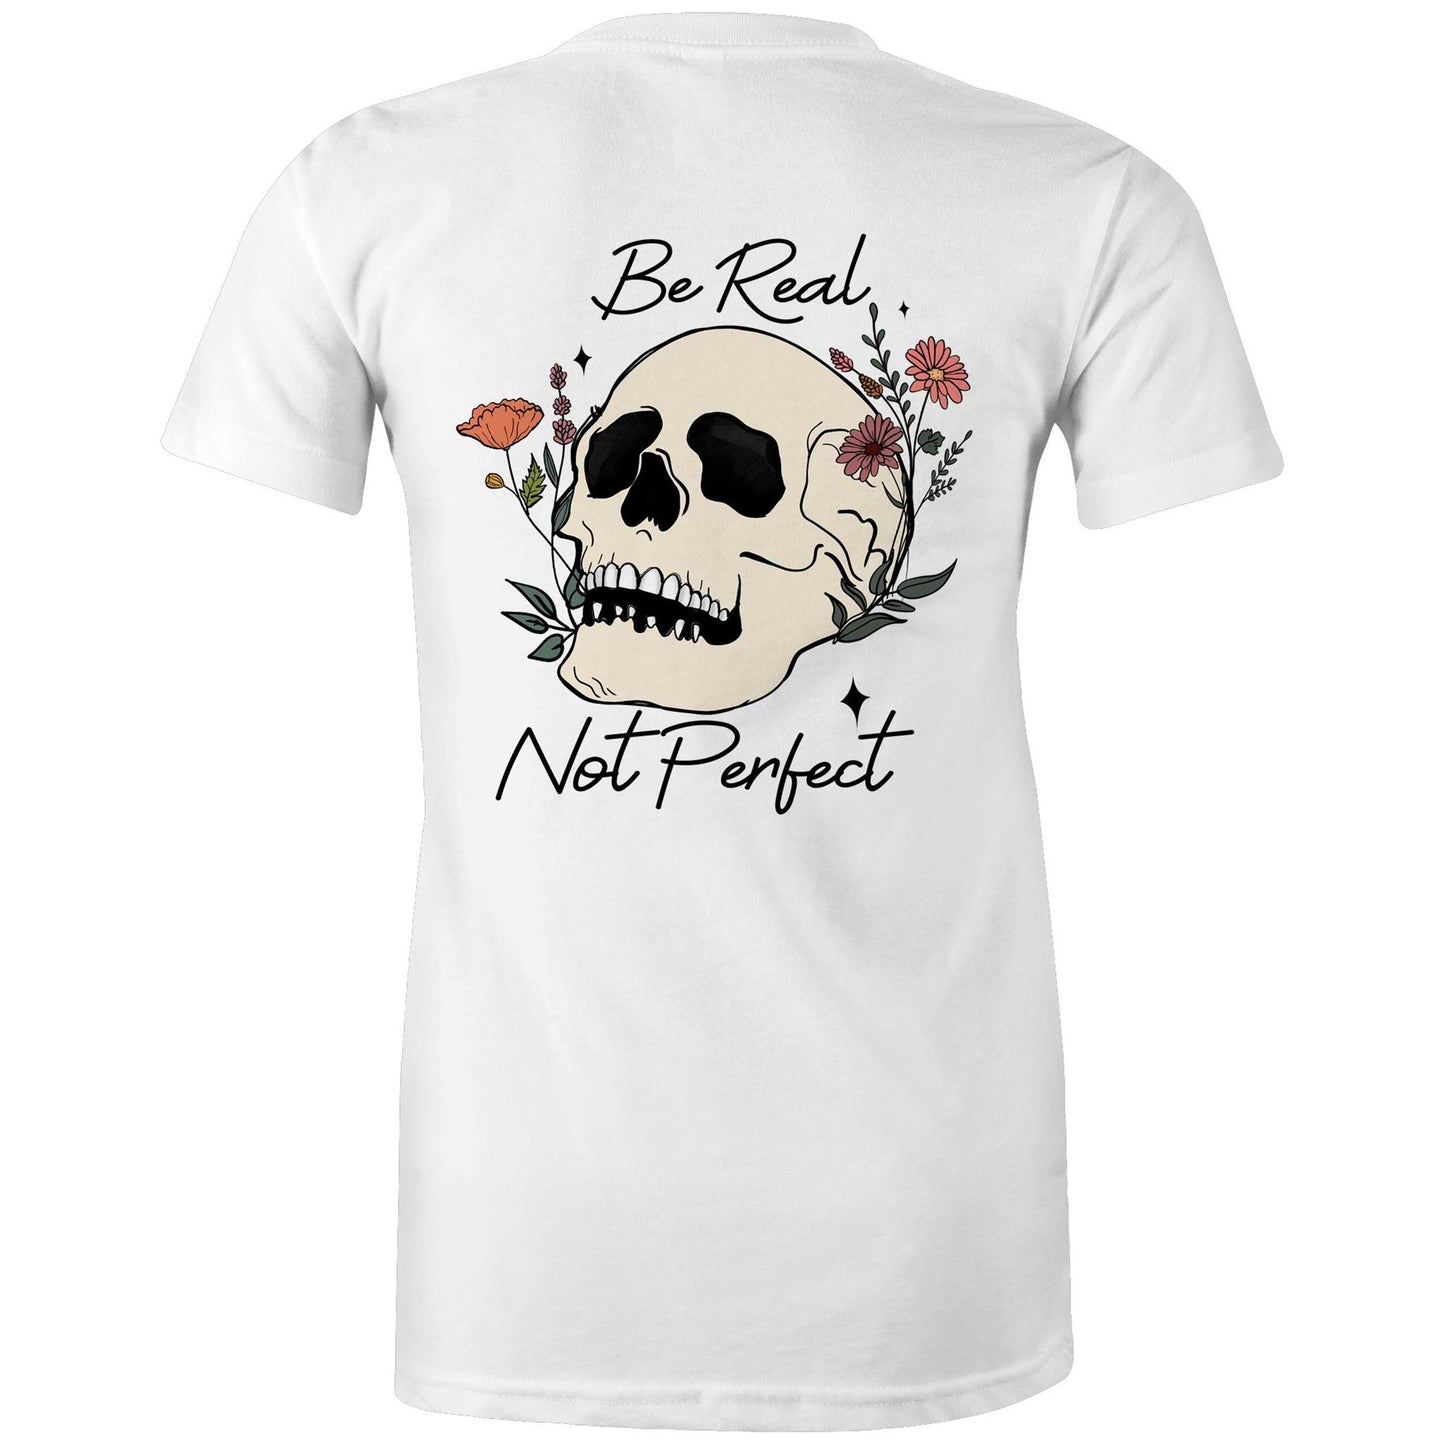 Womens Tee - Be Real Not Perfect